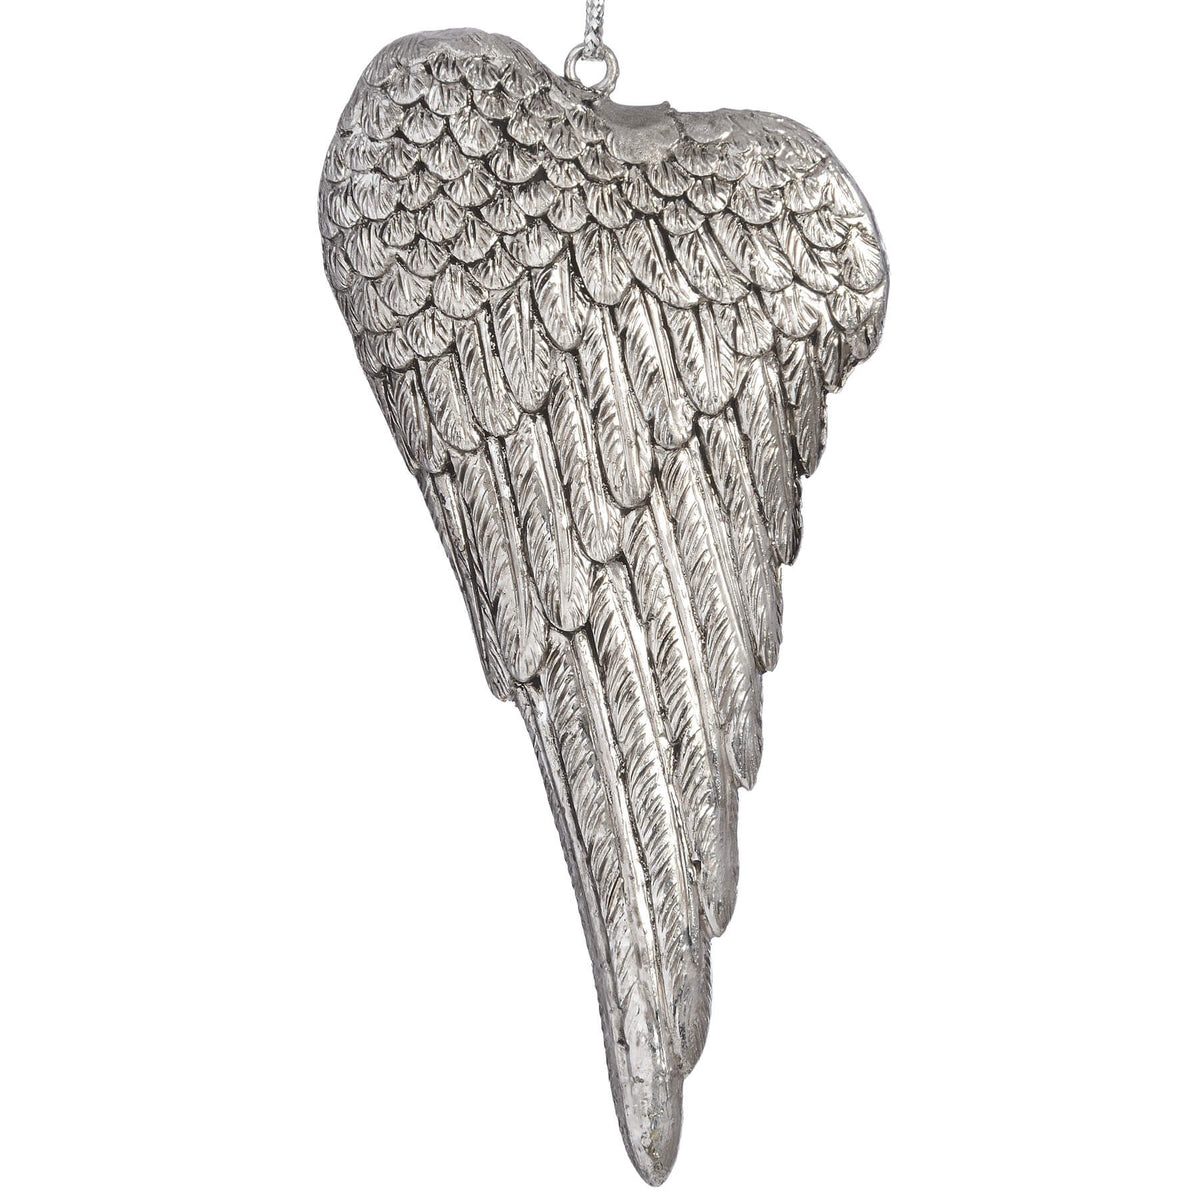 Set of 6 Silver wing hanging ornaments.